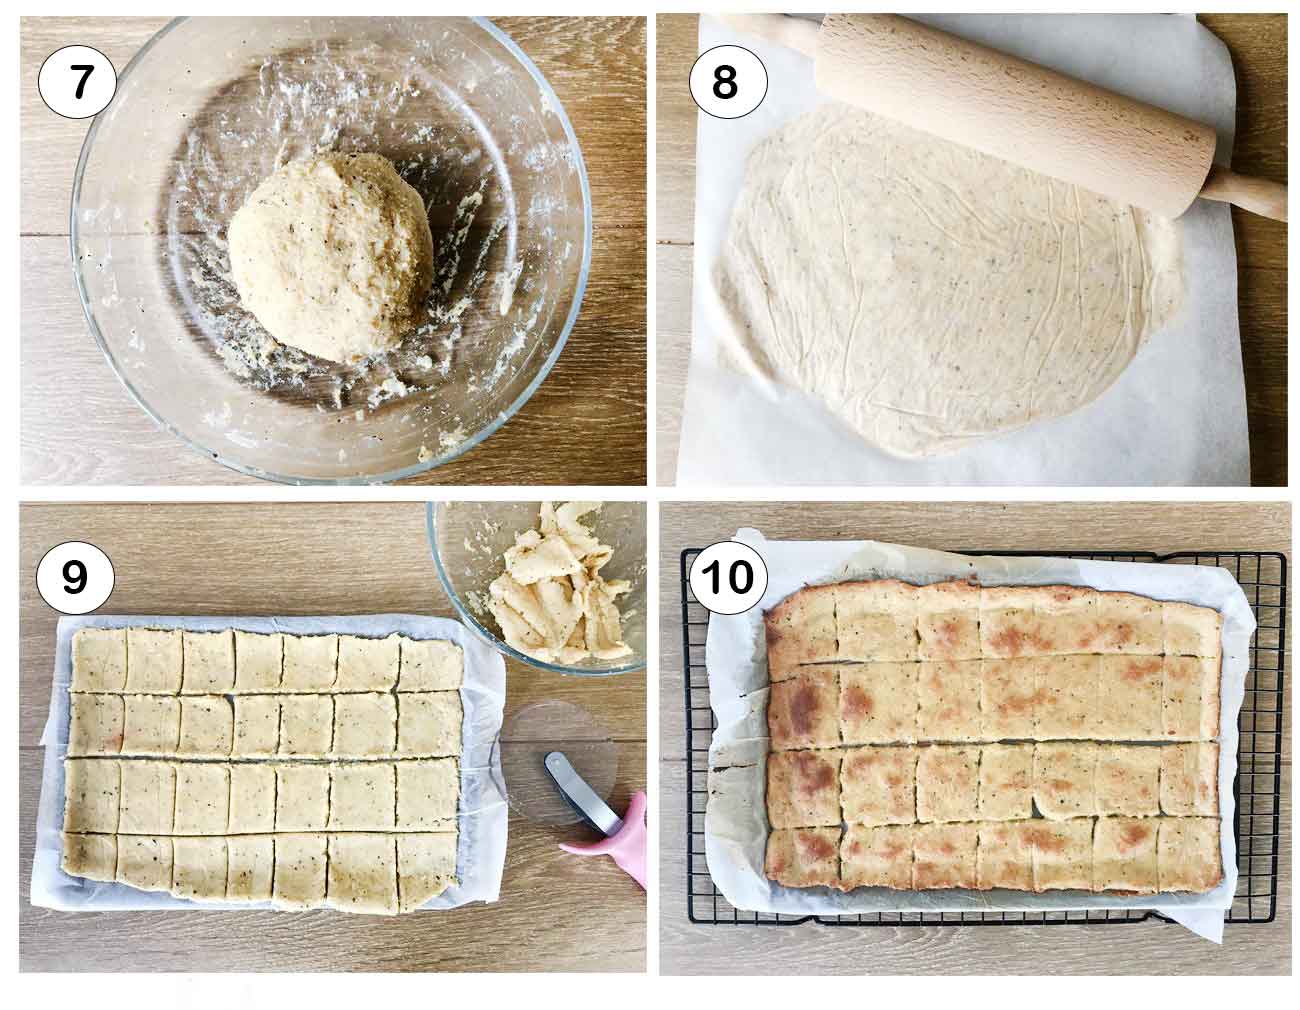 Step by step instructions for making the recipe.